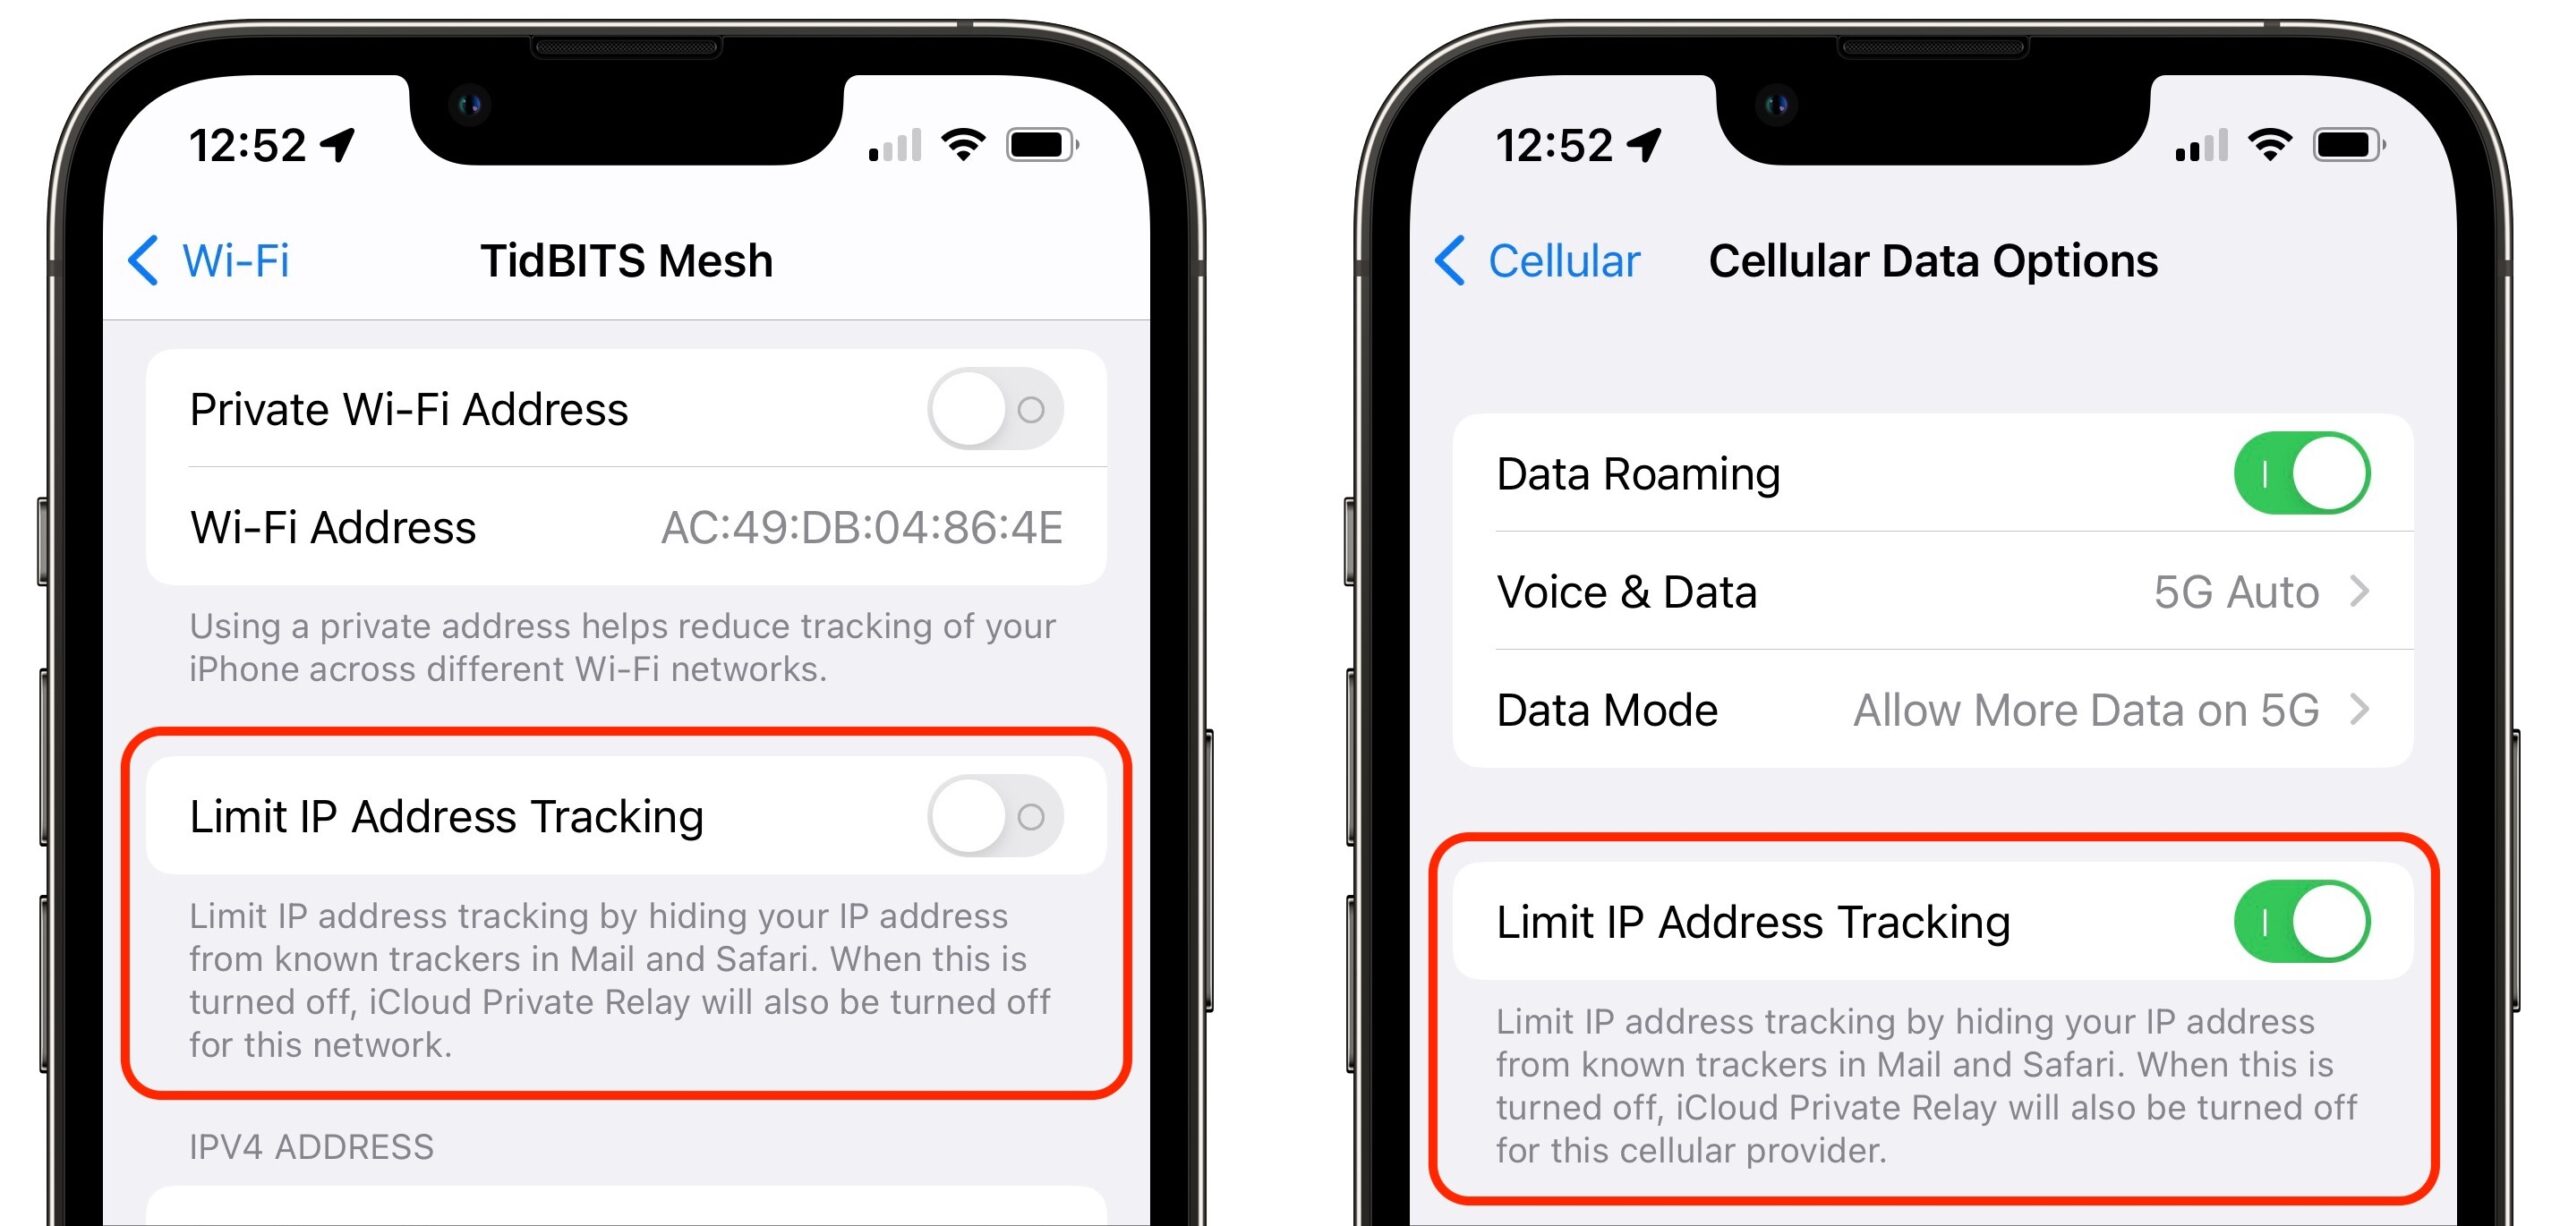 connectivity-clarity-identifying-wi-fi-status-on-iphone-10